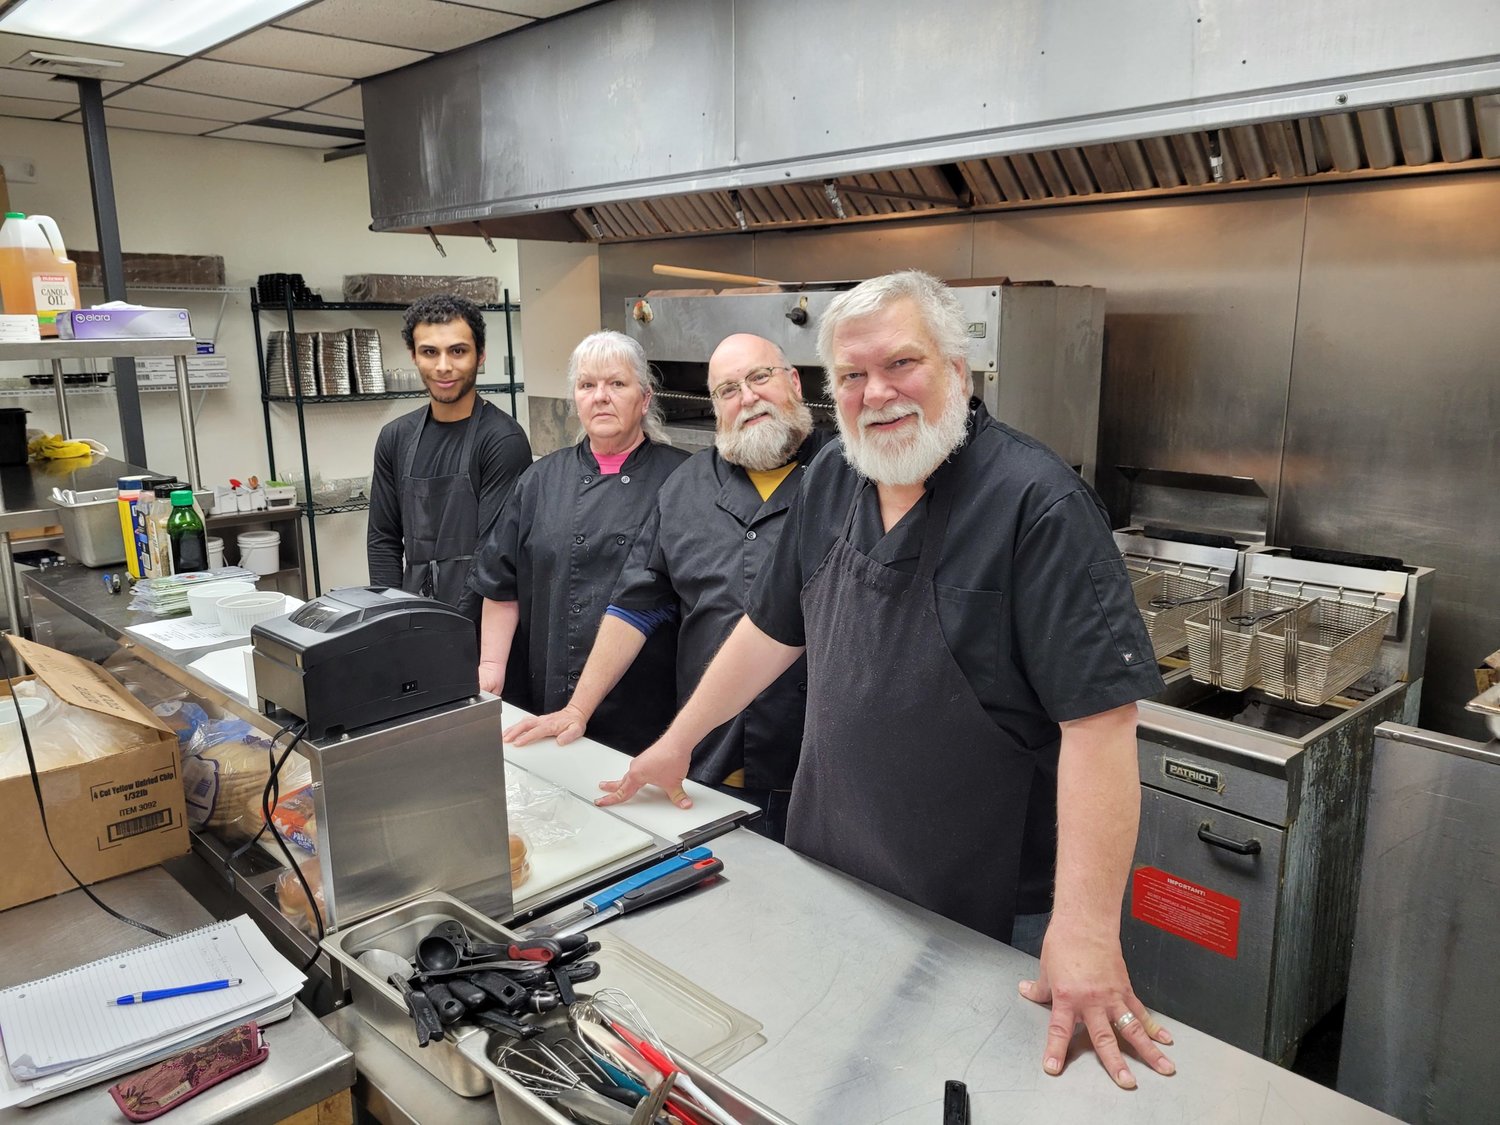 Fort Madison's Dave Taylor and his crew were hard at it in the kitchen of River Rocks Saturday during the group's soft opening of a new food menu at the bar. Photo by Chuck Vandenberg/PCC